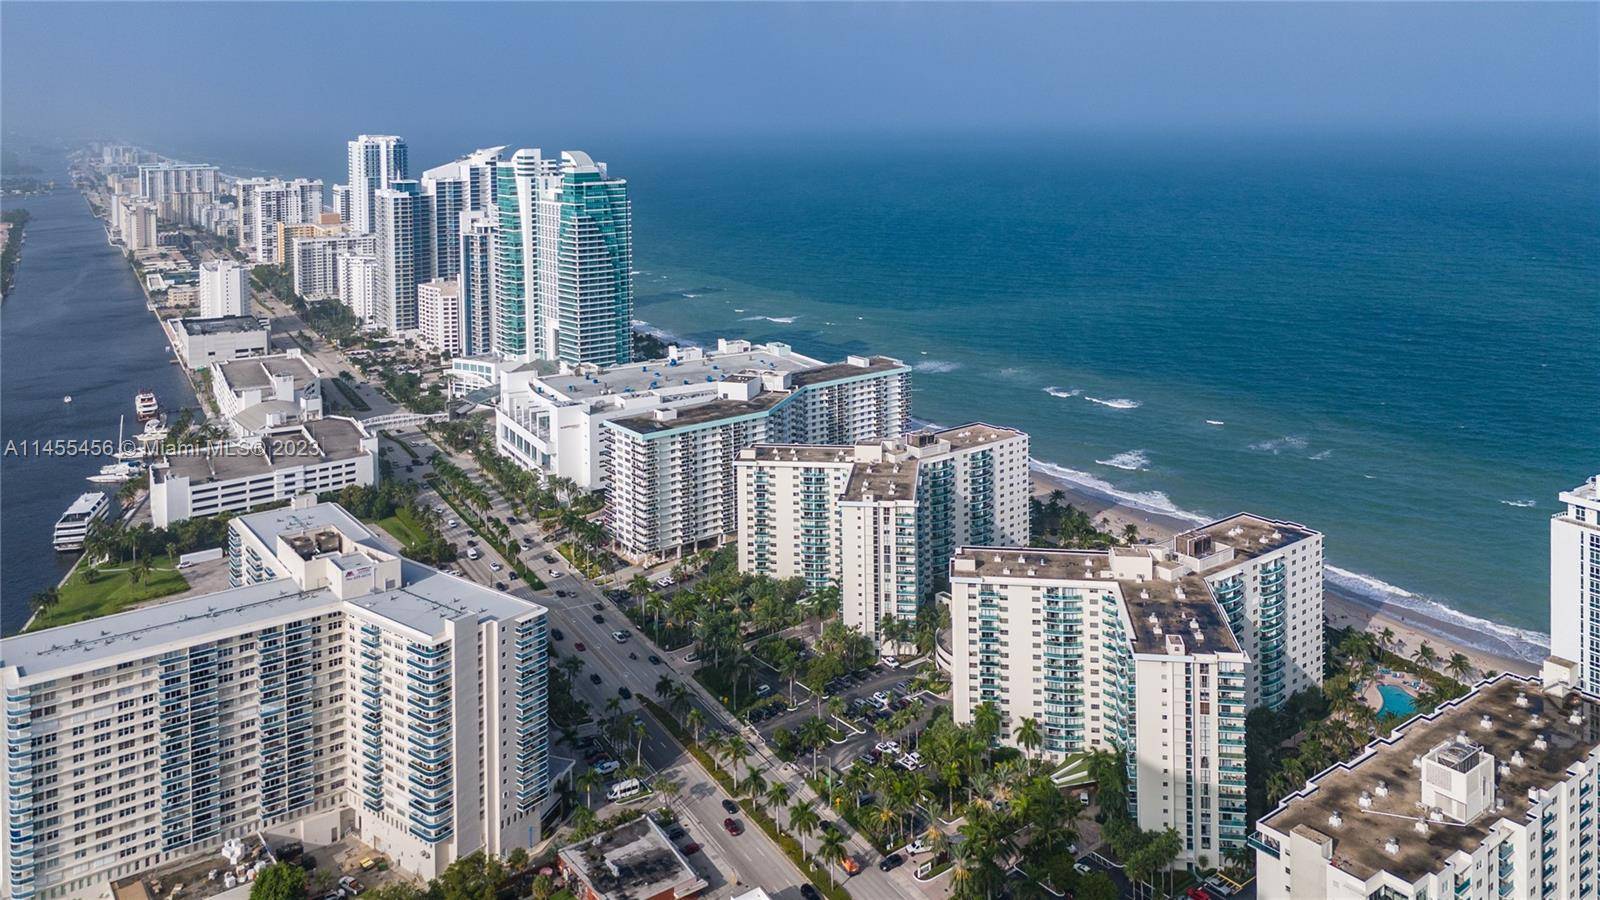 Bright and spacious, furnished with modern concept 2 2 unit w beautiful ocean and intercostal views from the large open balcony, located in the oceanfront building with great amenities is ...